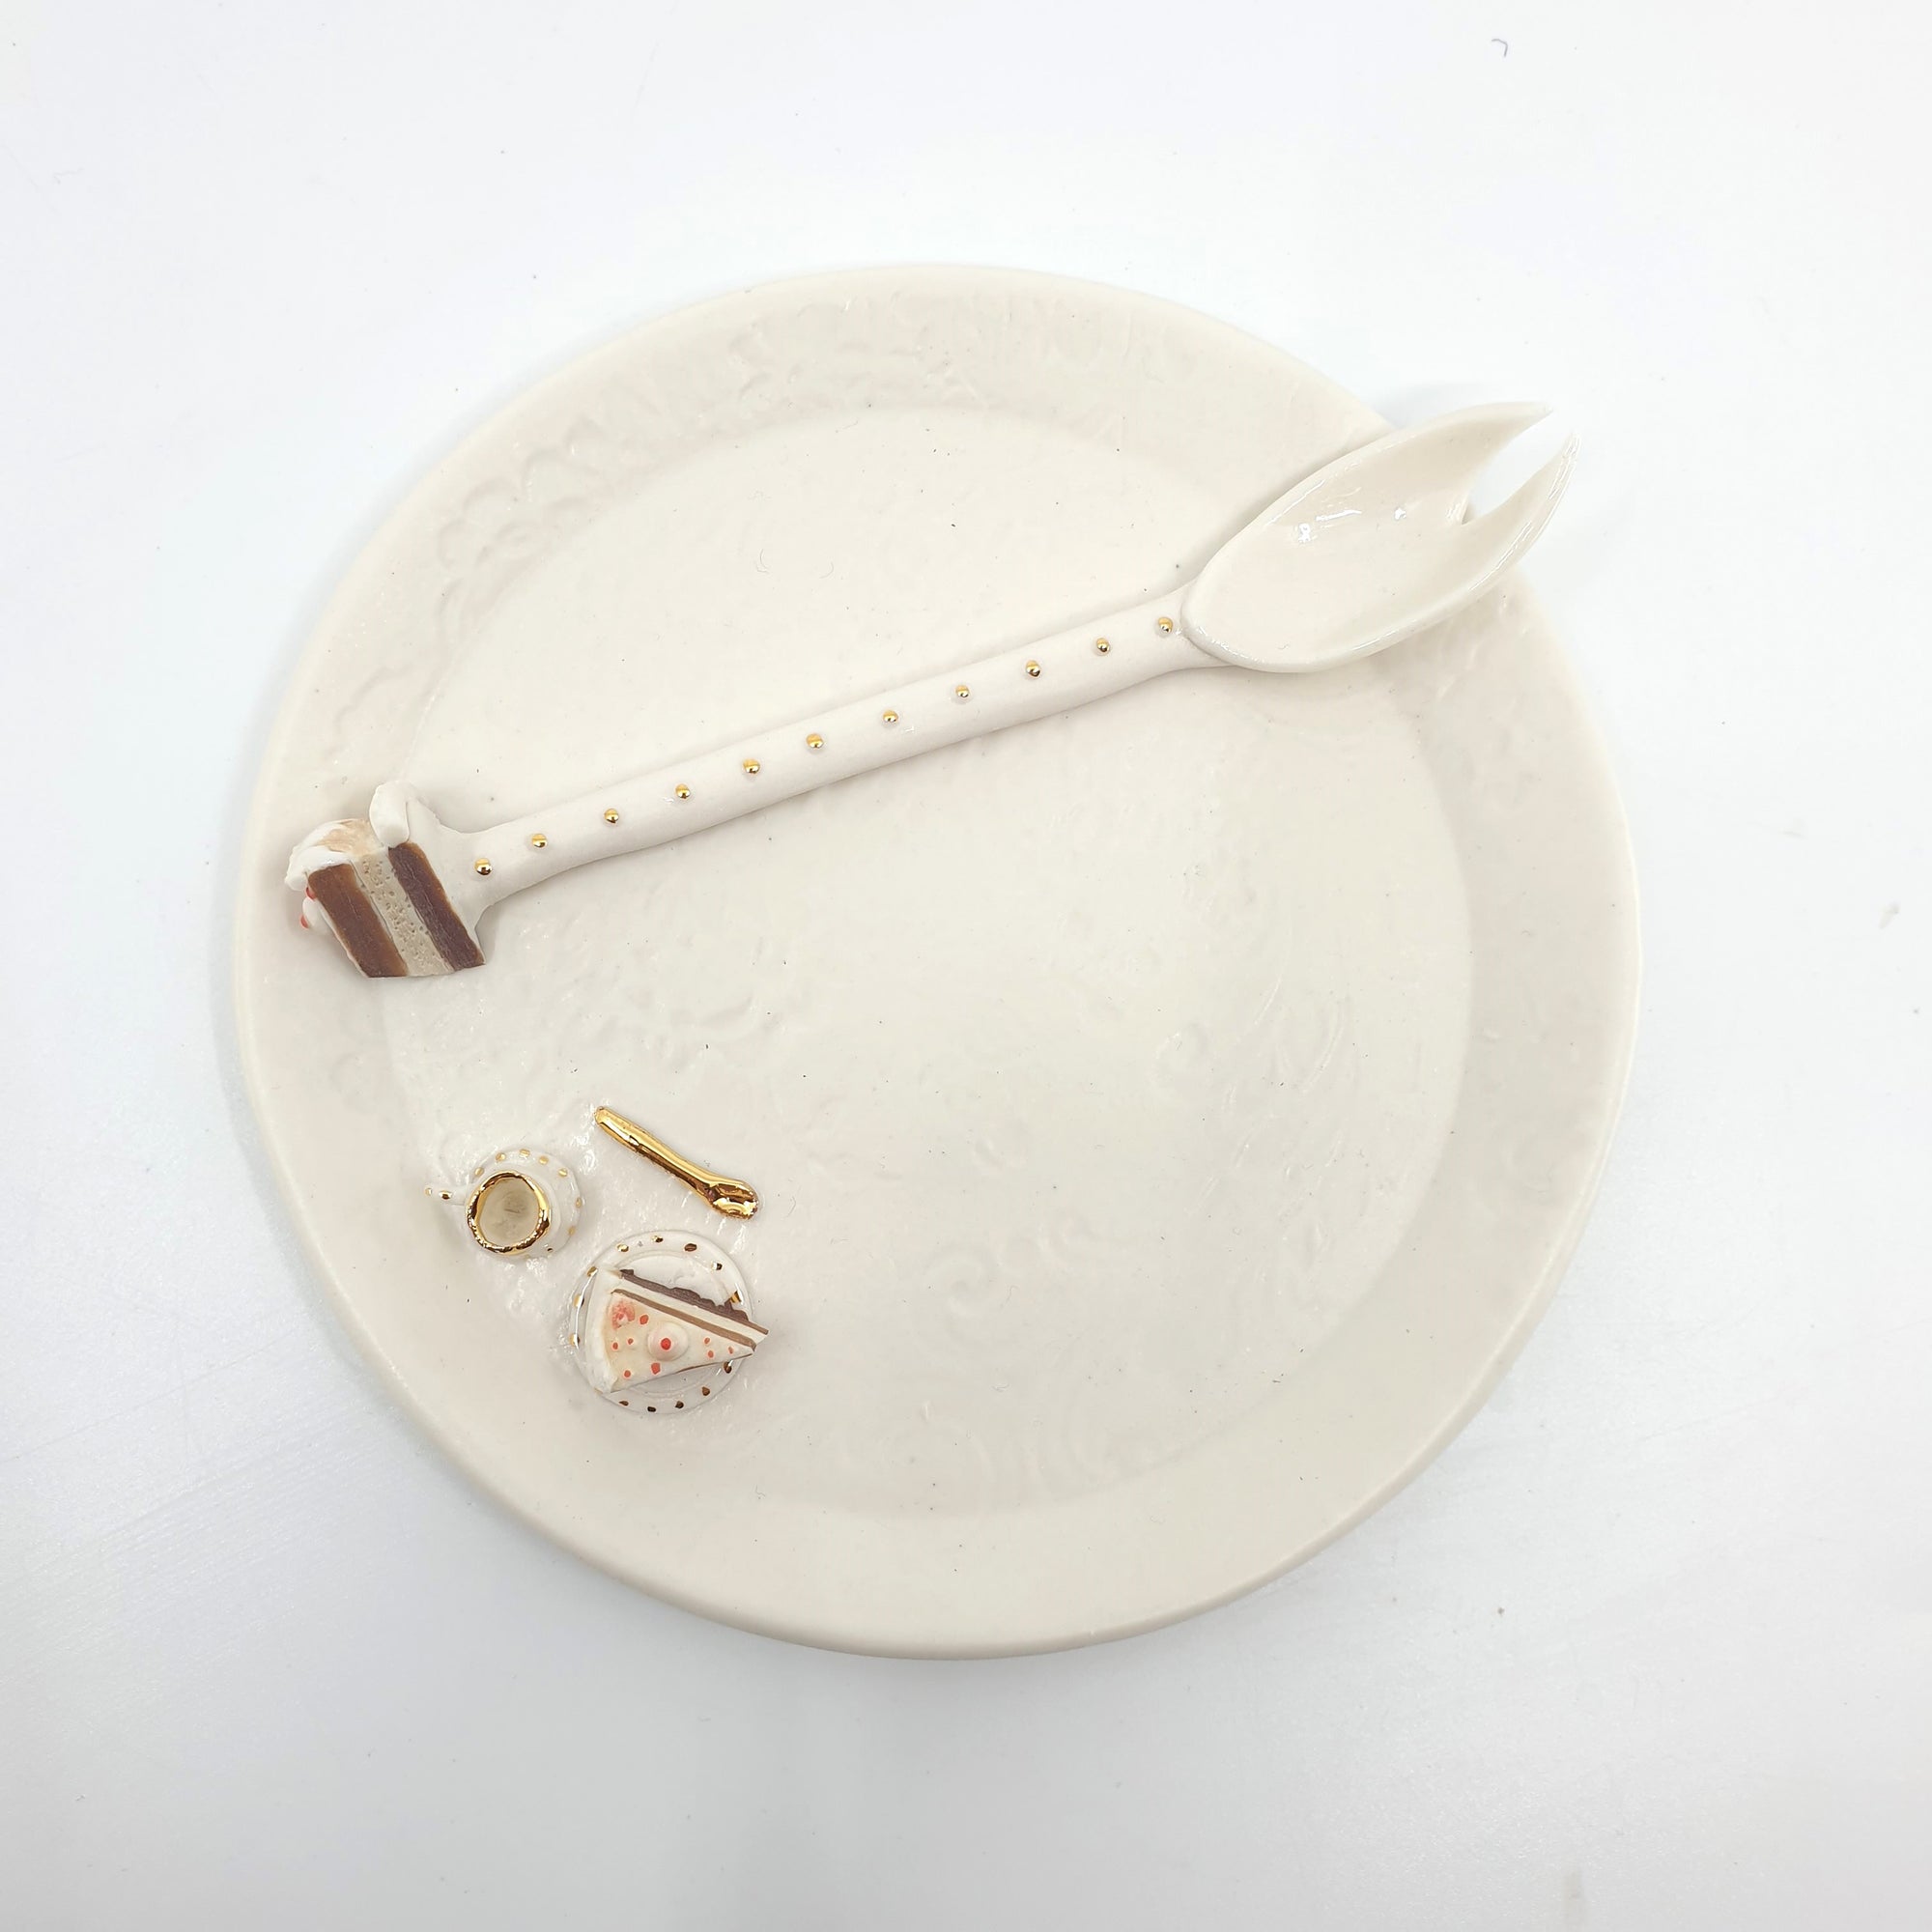 Cake plate and fork set